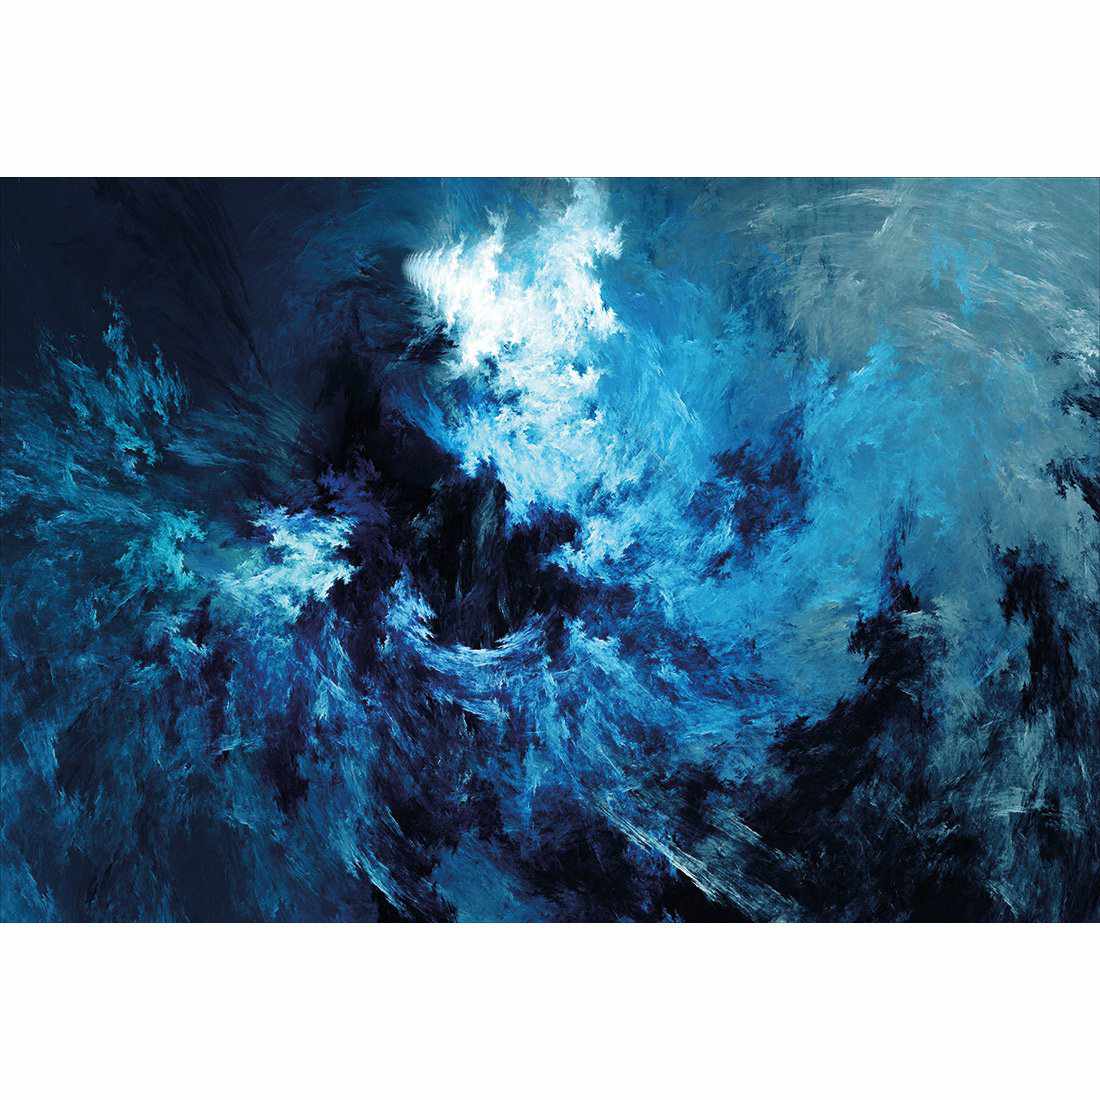 Into the Storm-Acrylic-Wall Art Design-With Border-Acrylic - No Frame-45x30cm-Wall Art Designs